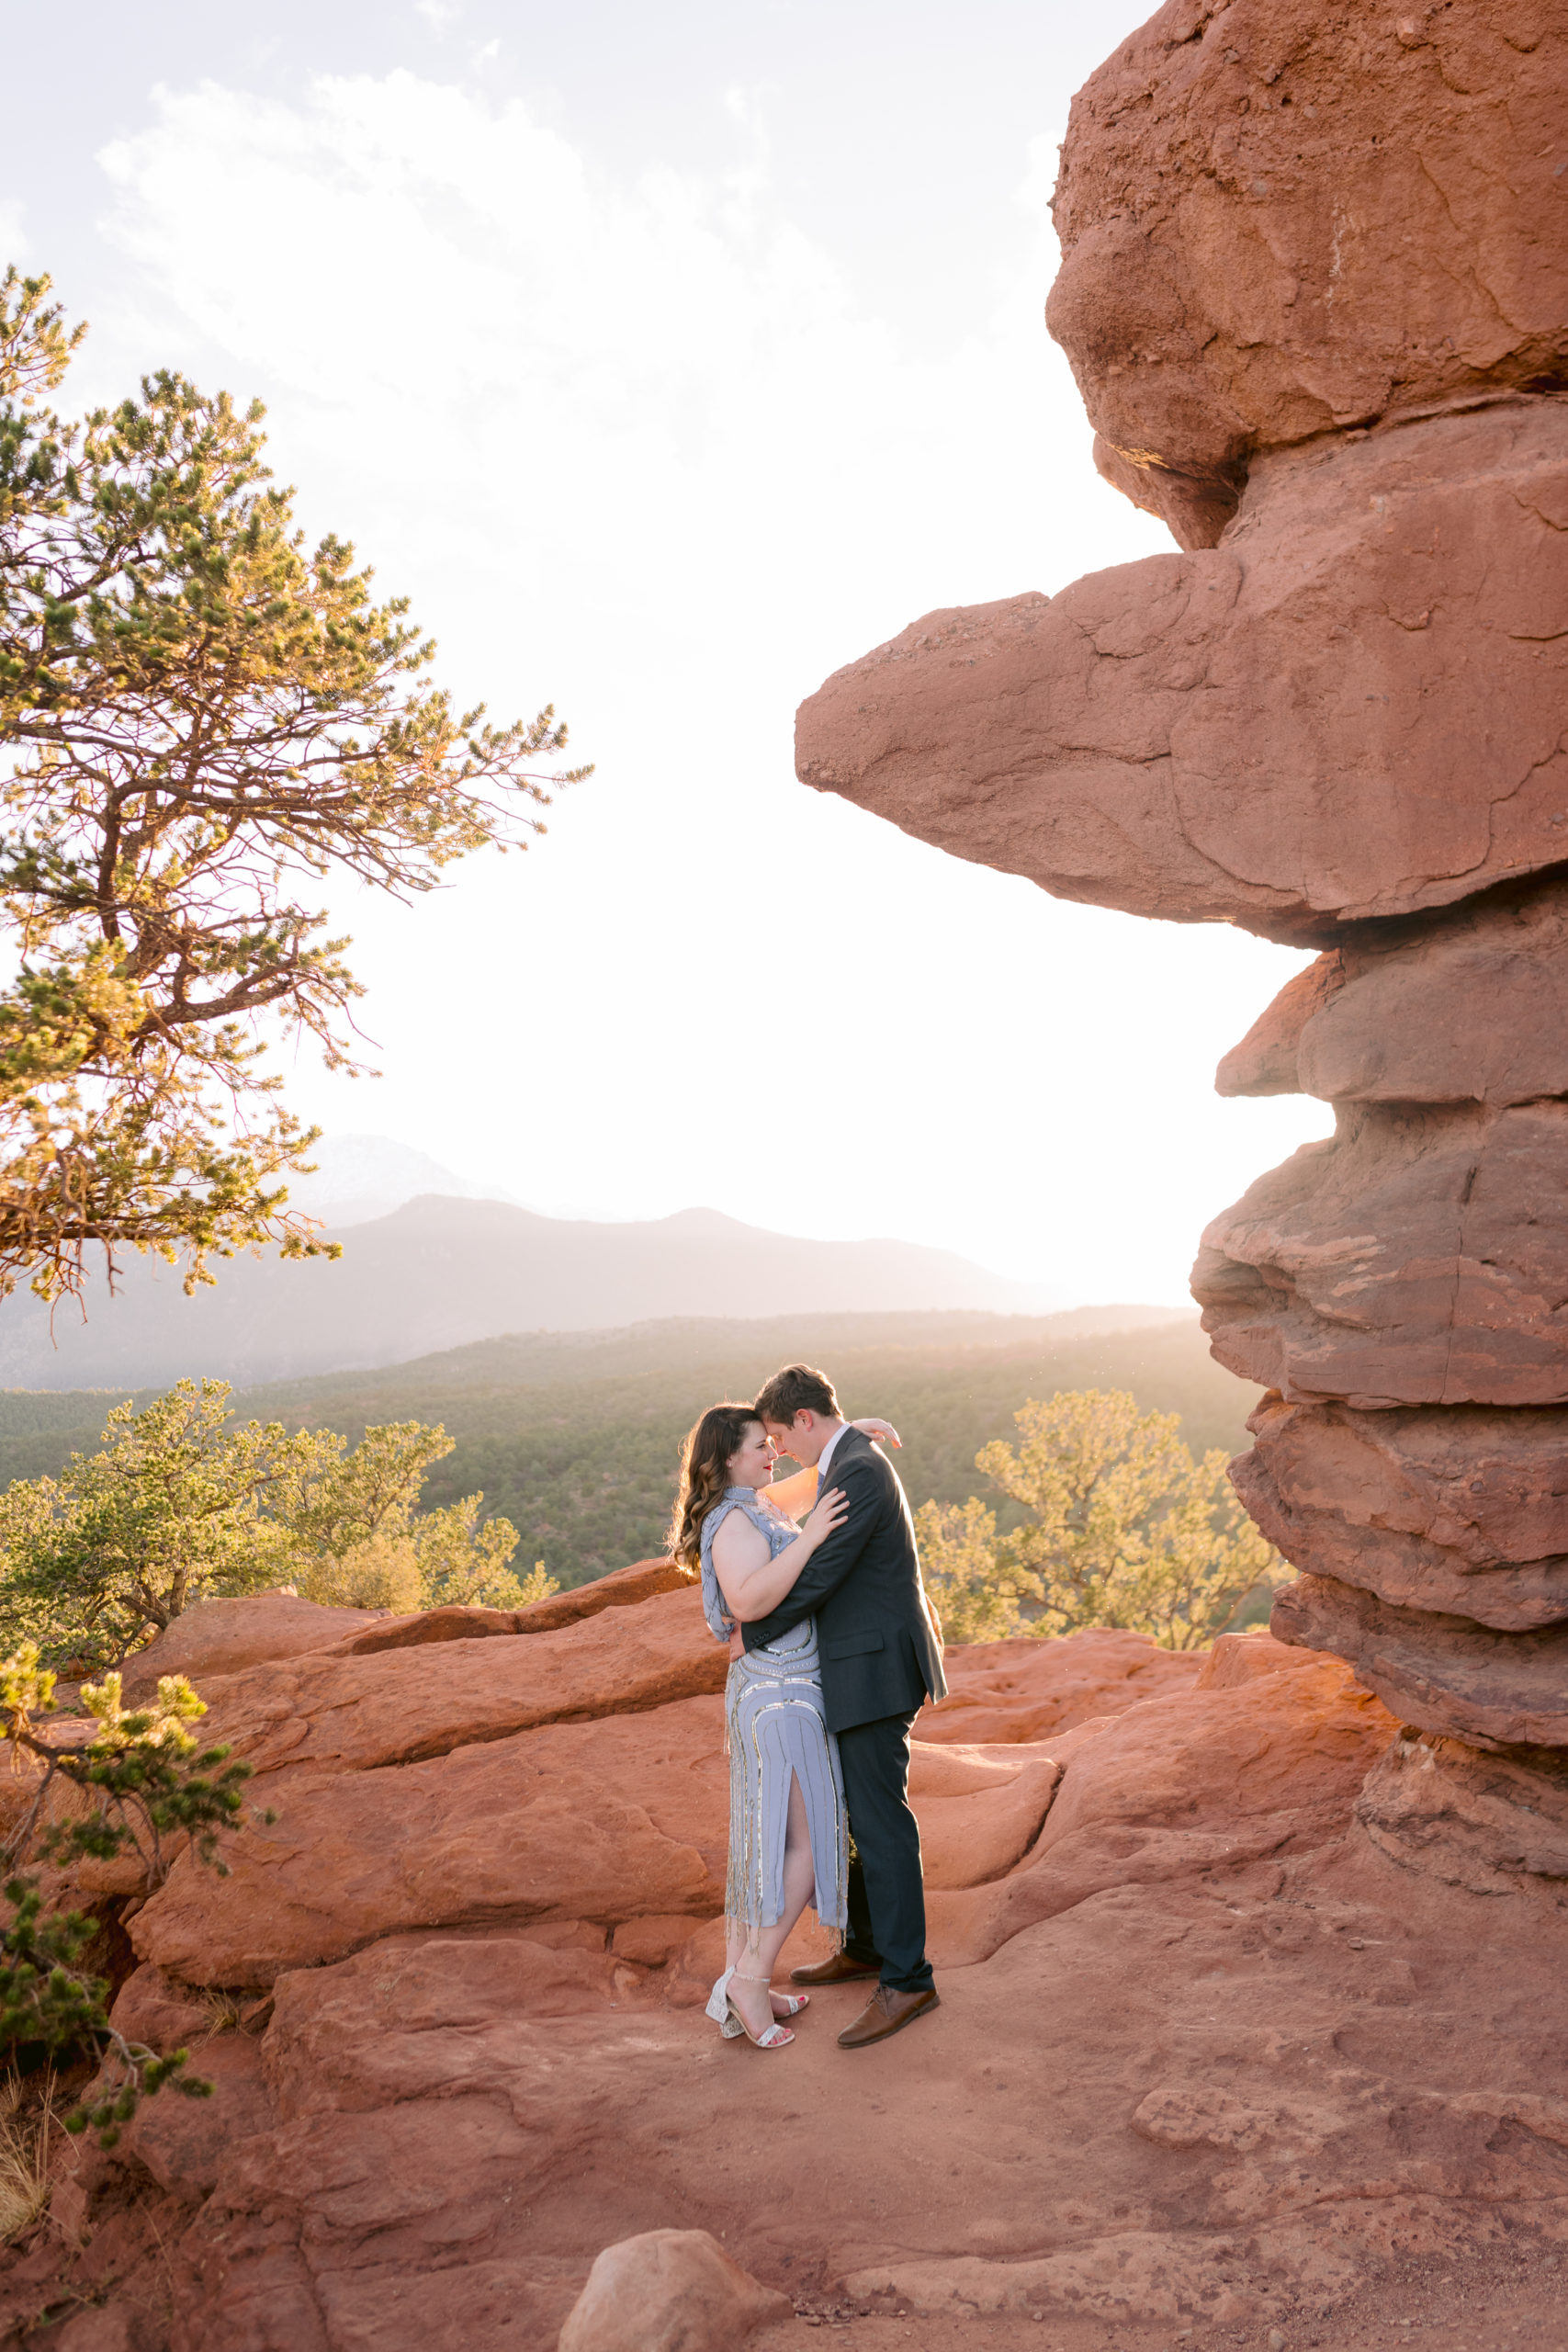 Engaged couple embraced by rock formation at Garden of the Gods overlooking Pikes Peak in the distance.